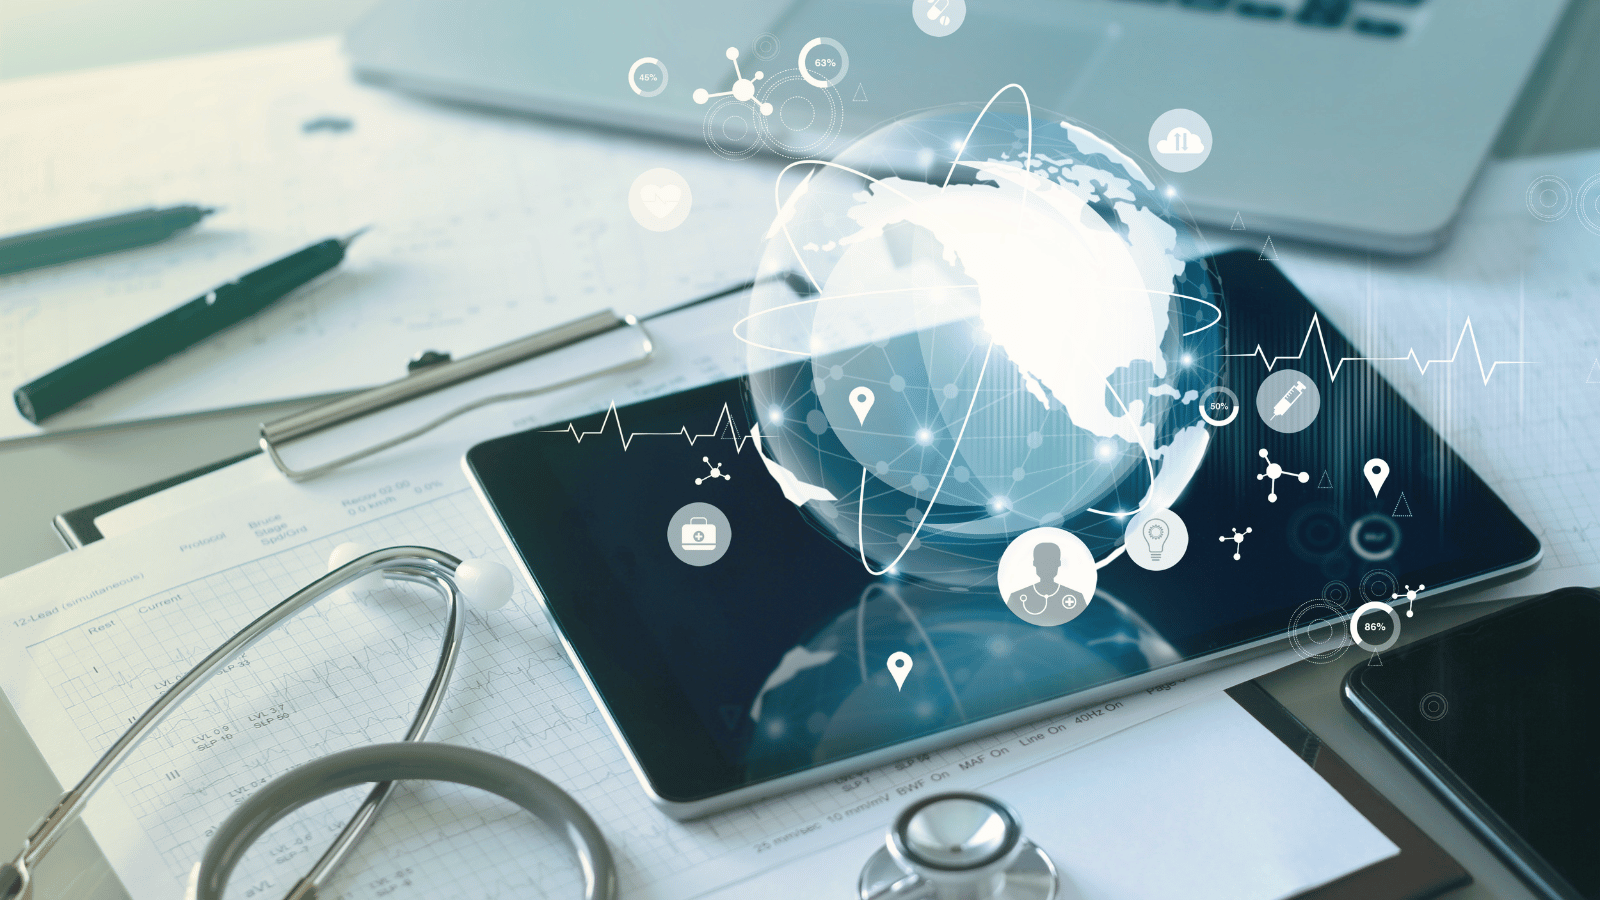 Introduction to the Digital Health of clinical trials